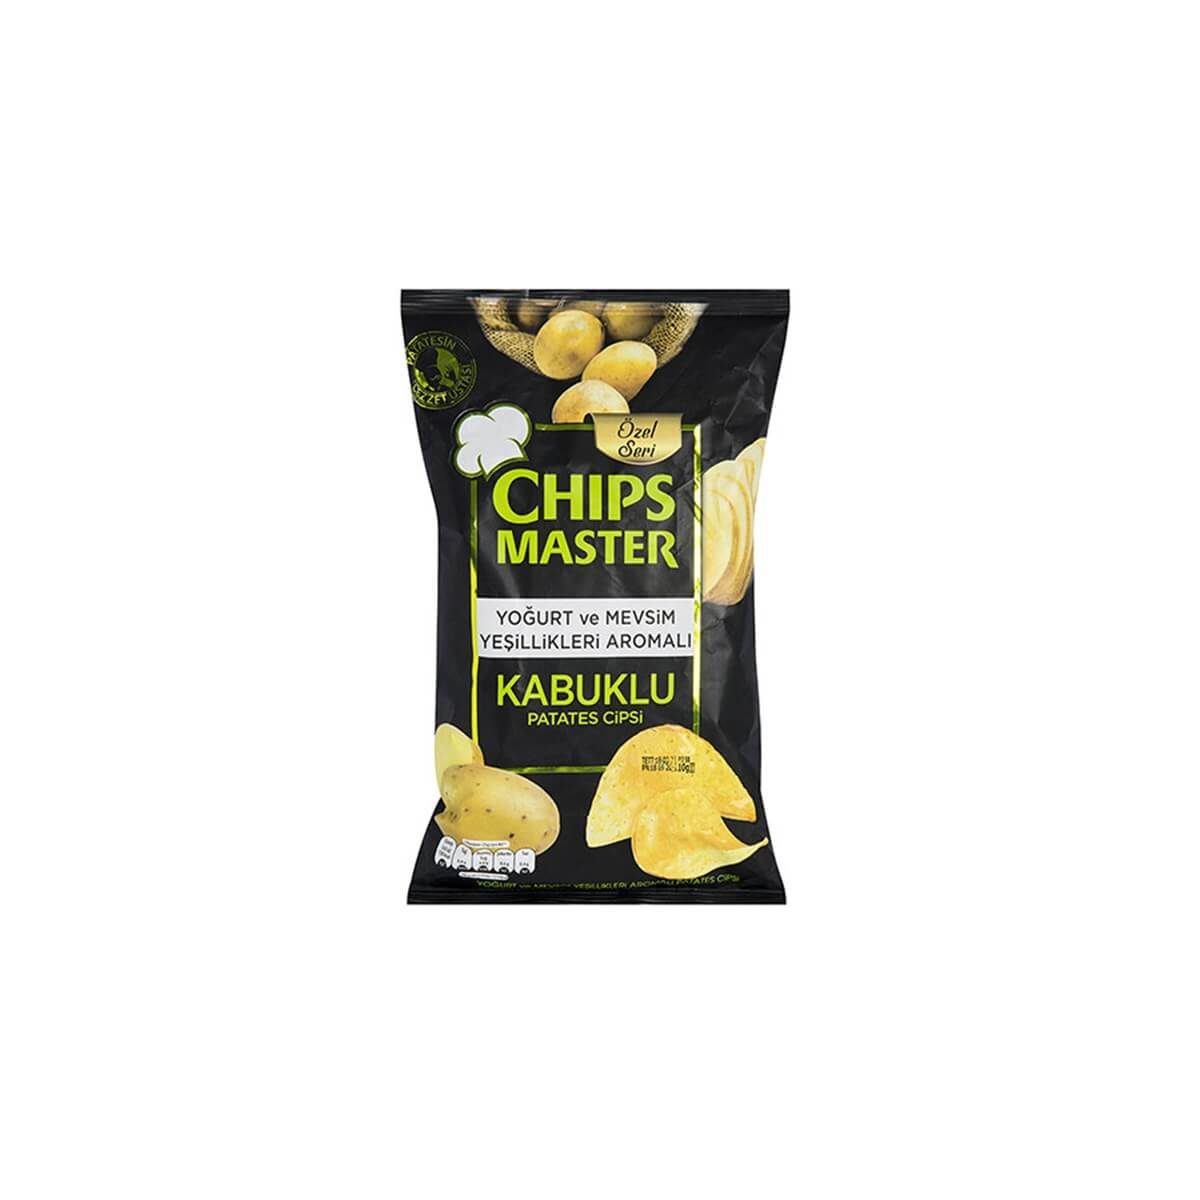 Chips Master Yogurt Flavored Potato Chips with Shell 104 G - Shop Chips at  Baqqalia.com - Best Brands and Products - Free Worldwide Shipping Over $150